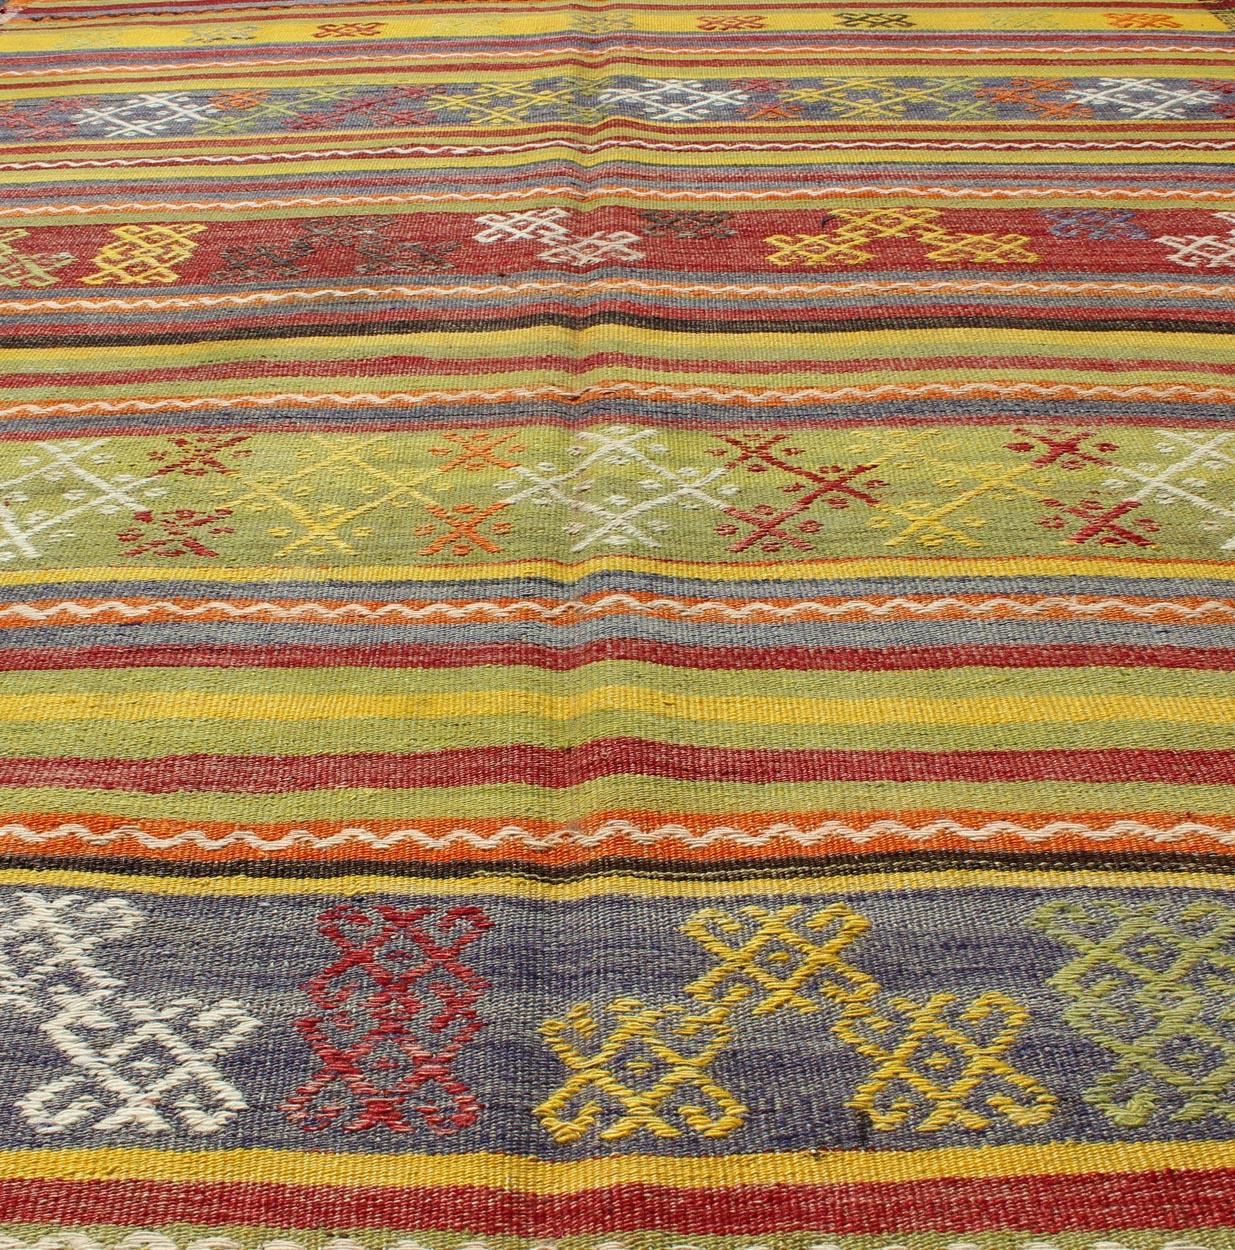 Vintage Turkish Kilim Rug with Geometric Shapes and Colorful Horizontal Stripes For Sale 5